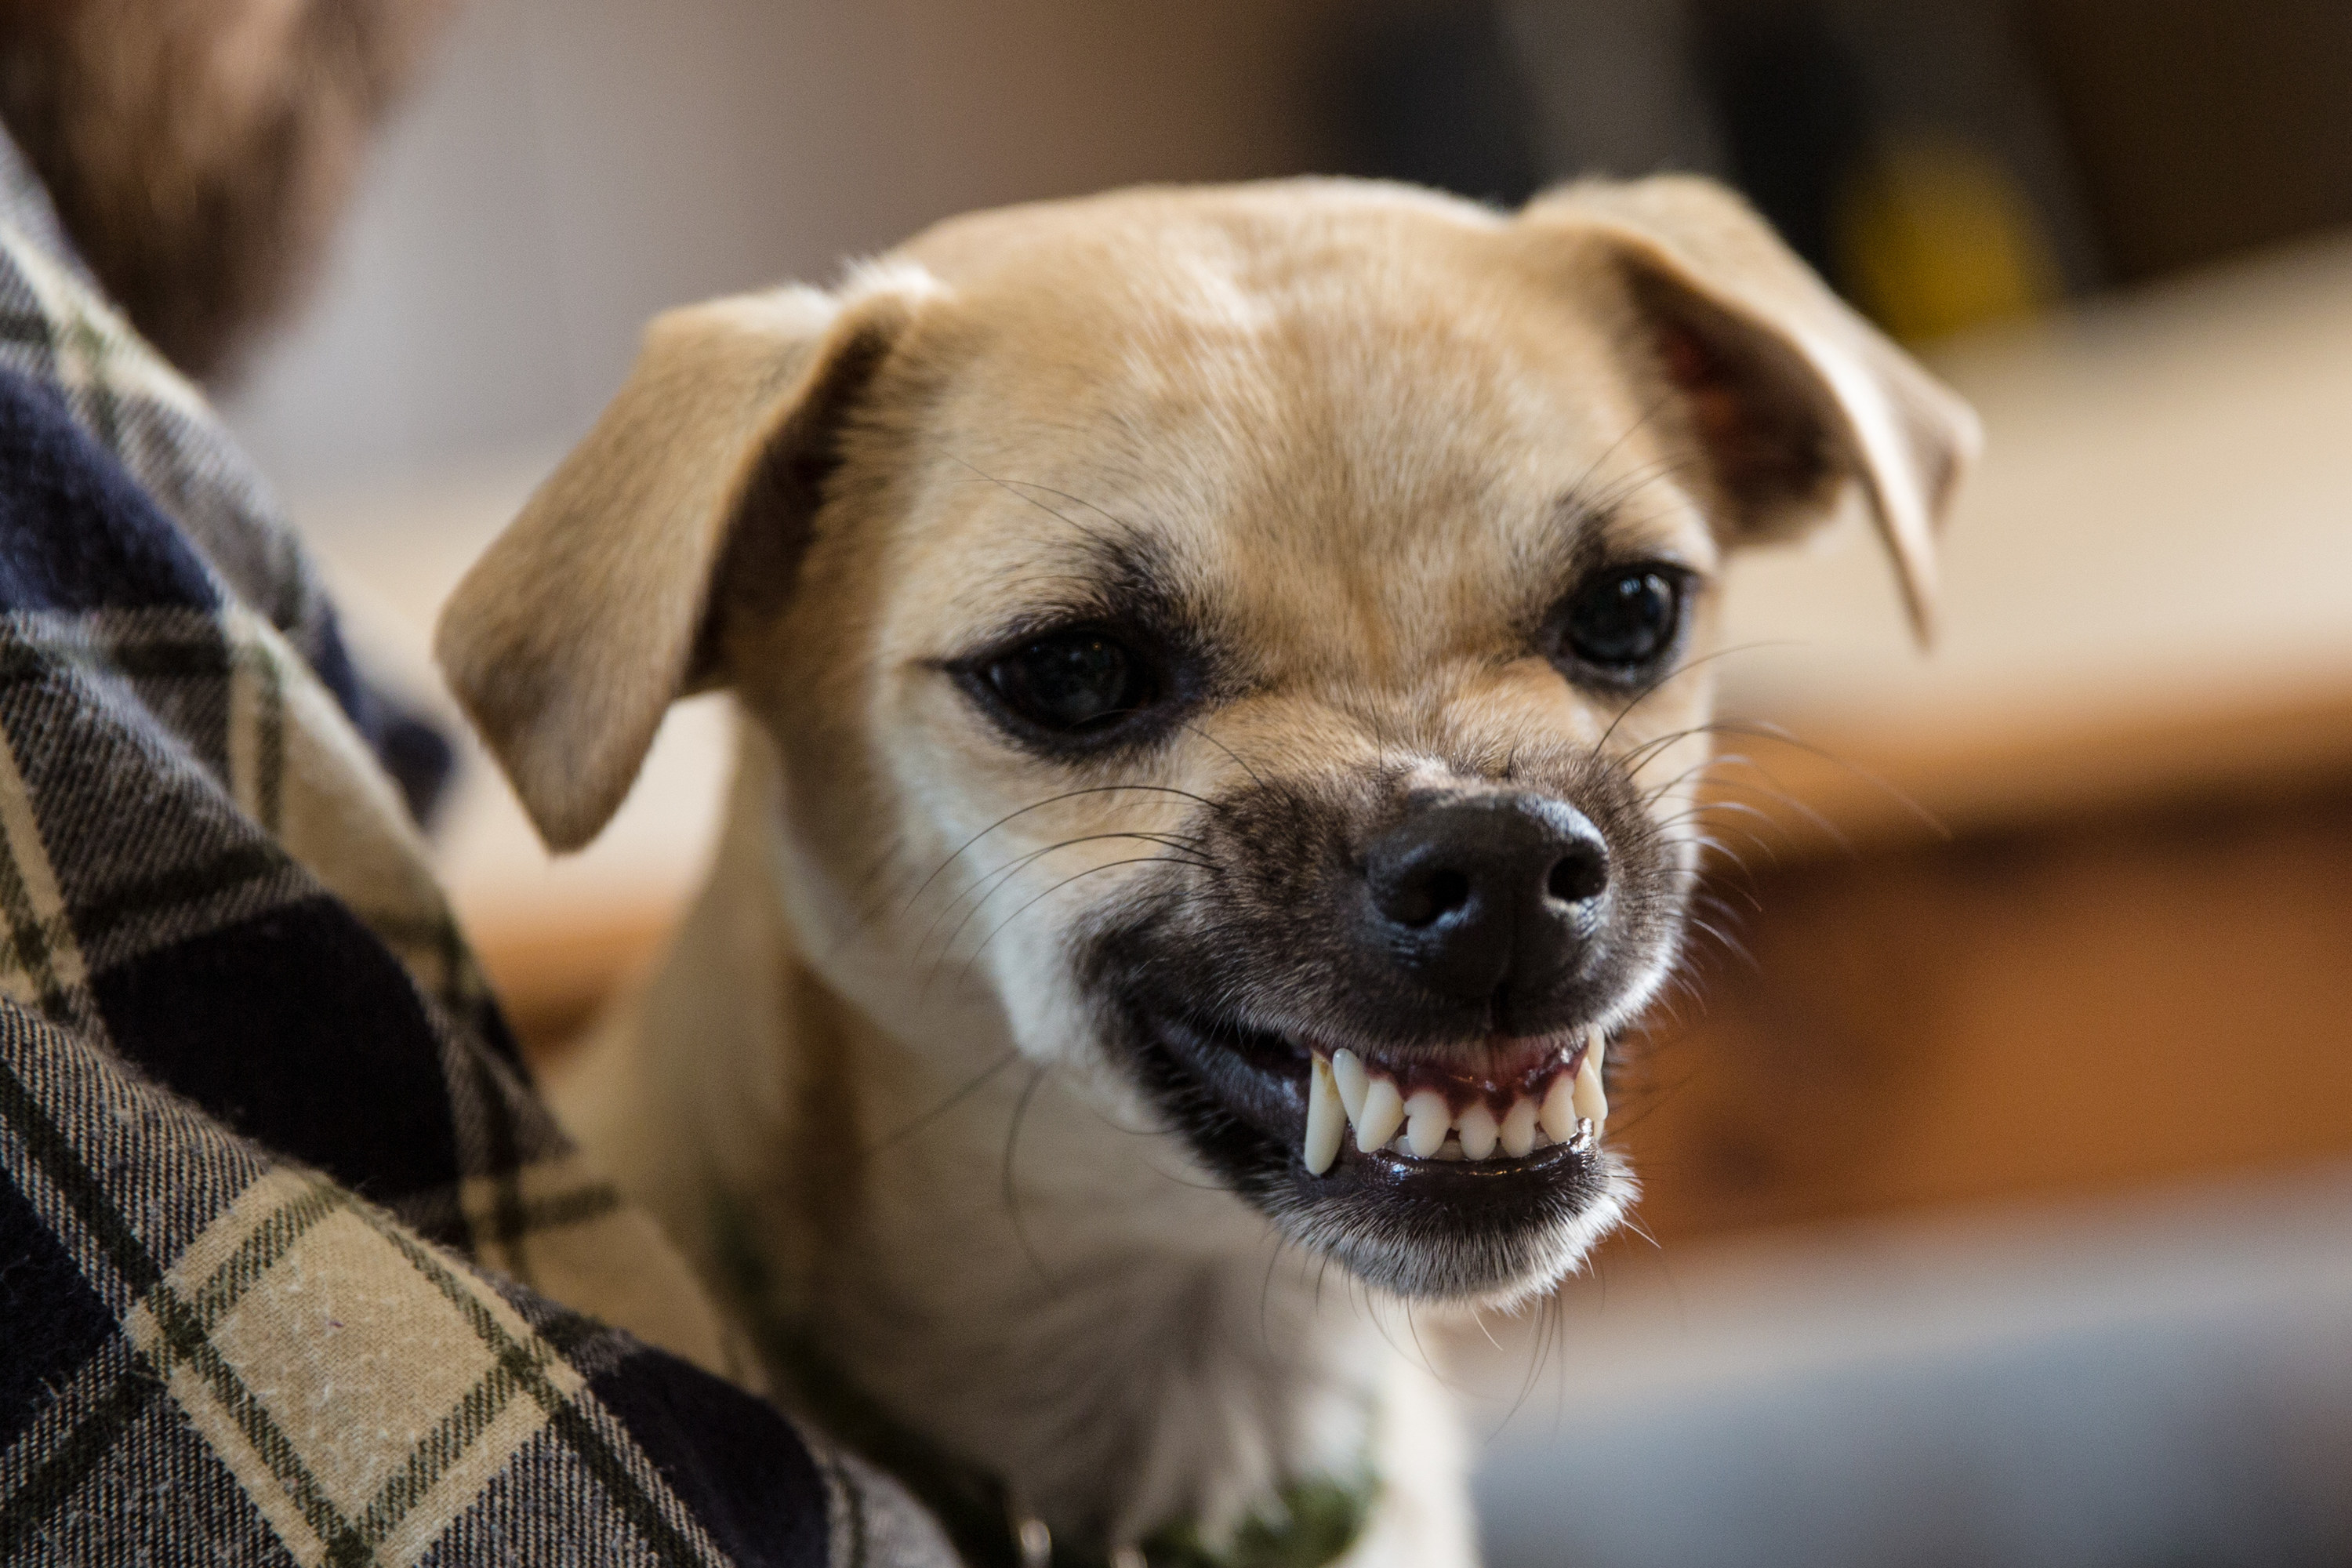 A dog is baring its teeth in a menacing but kind of cute way